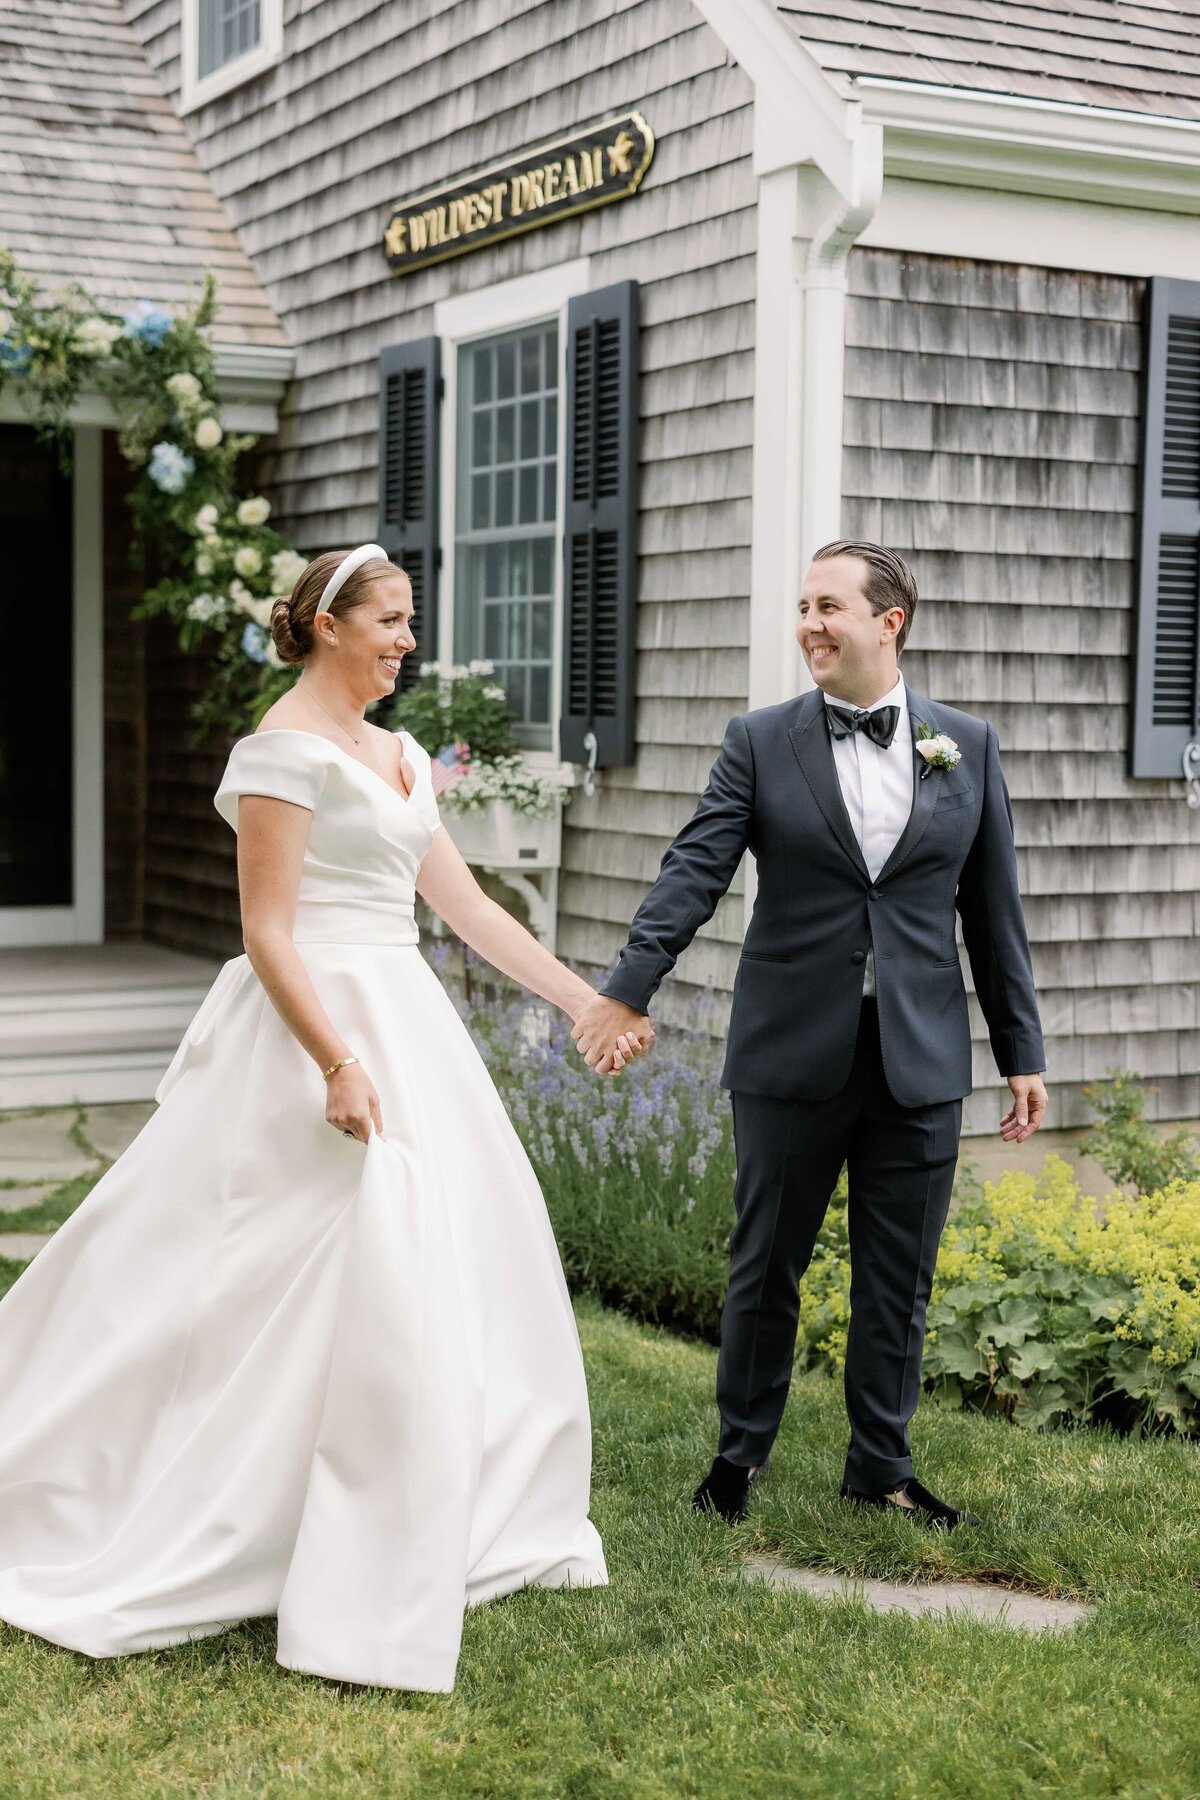 New England Bride and Groom at Estate Wedding - Cru and Co